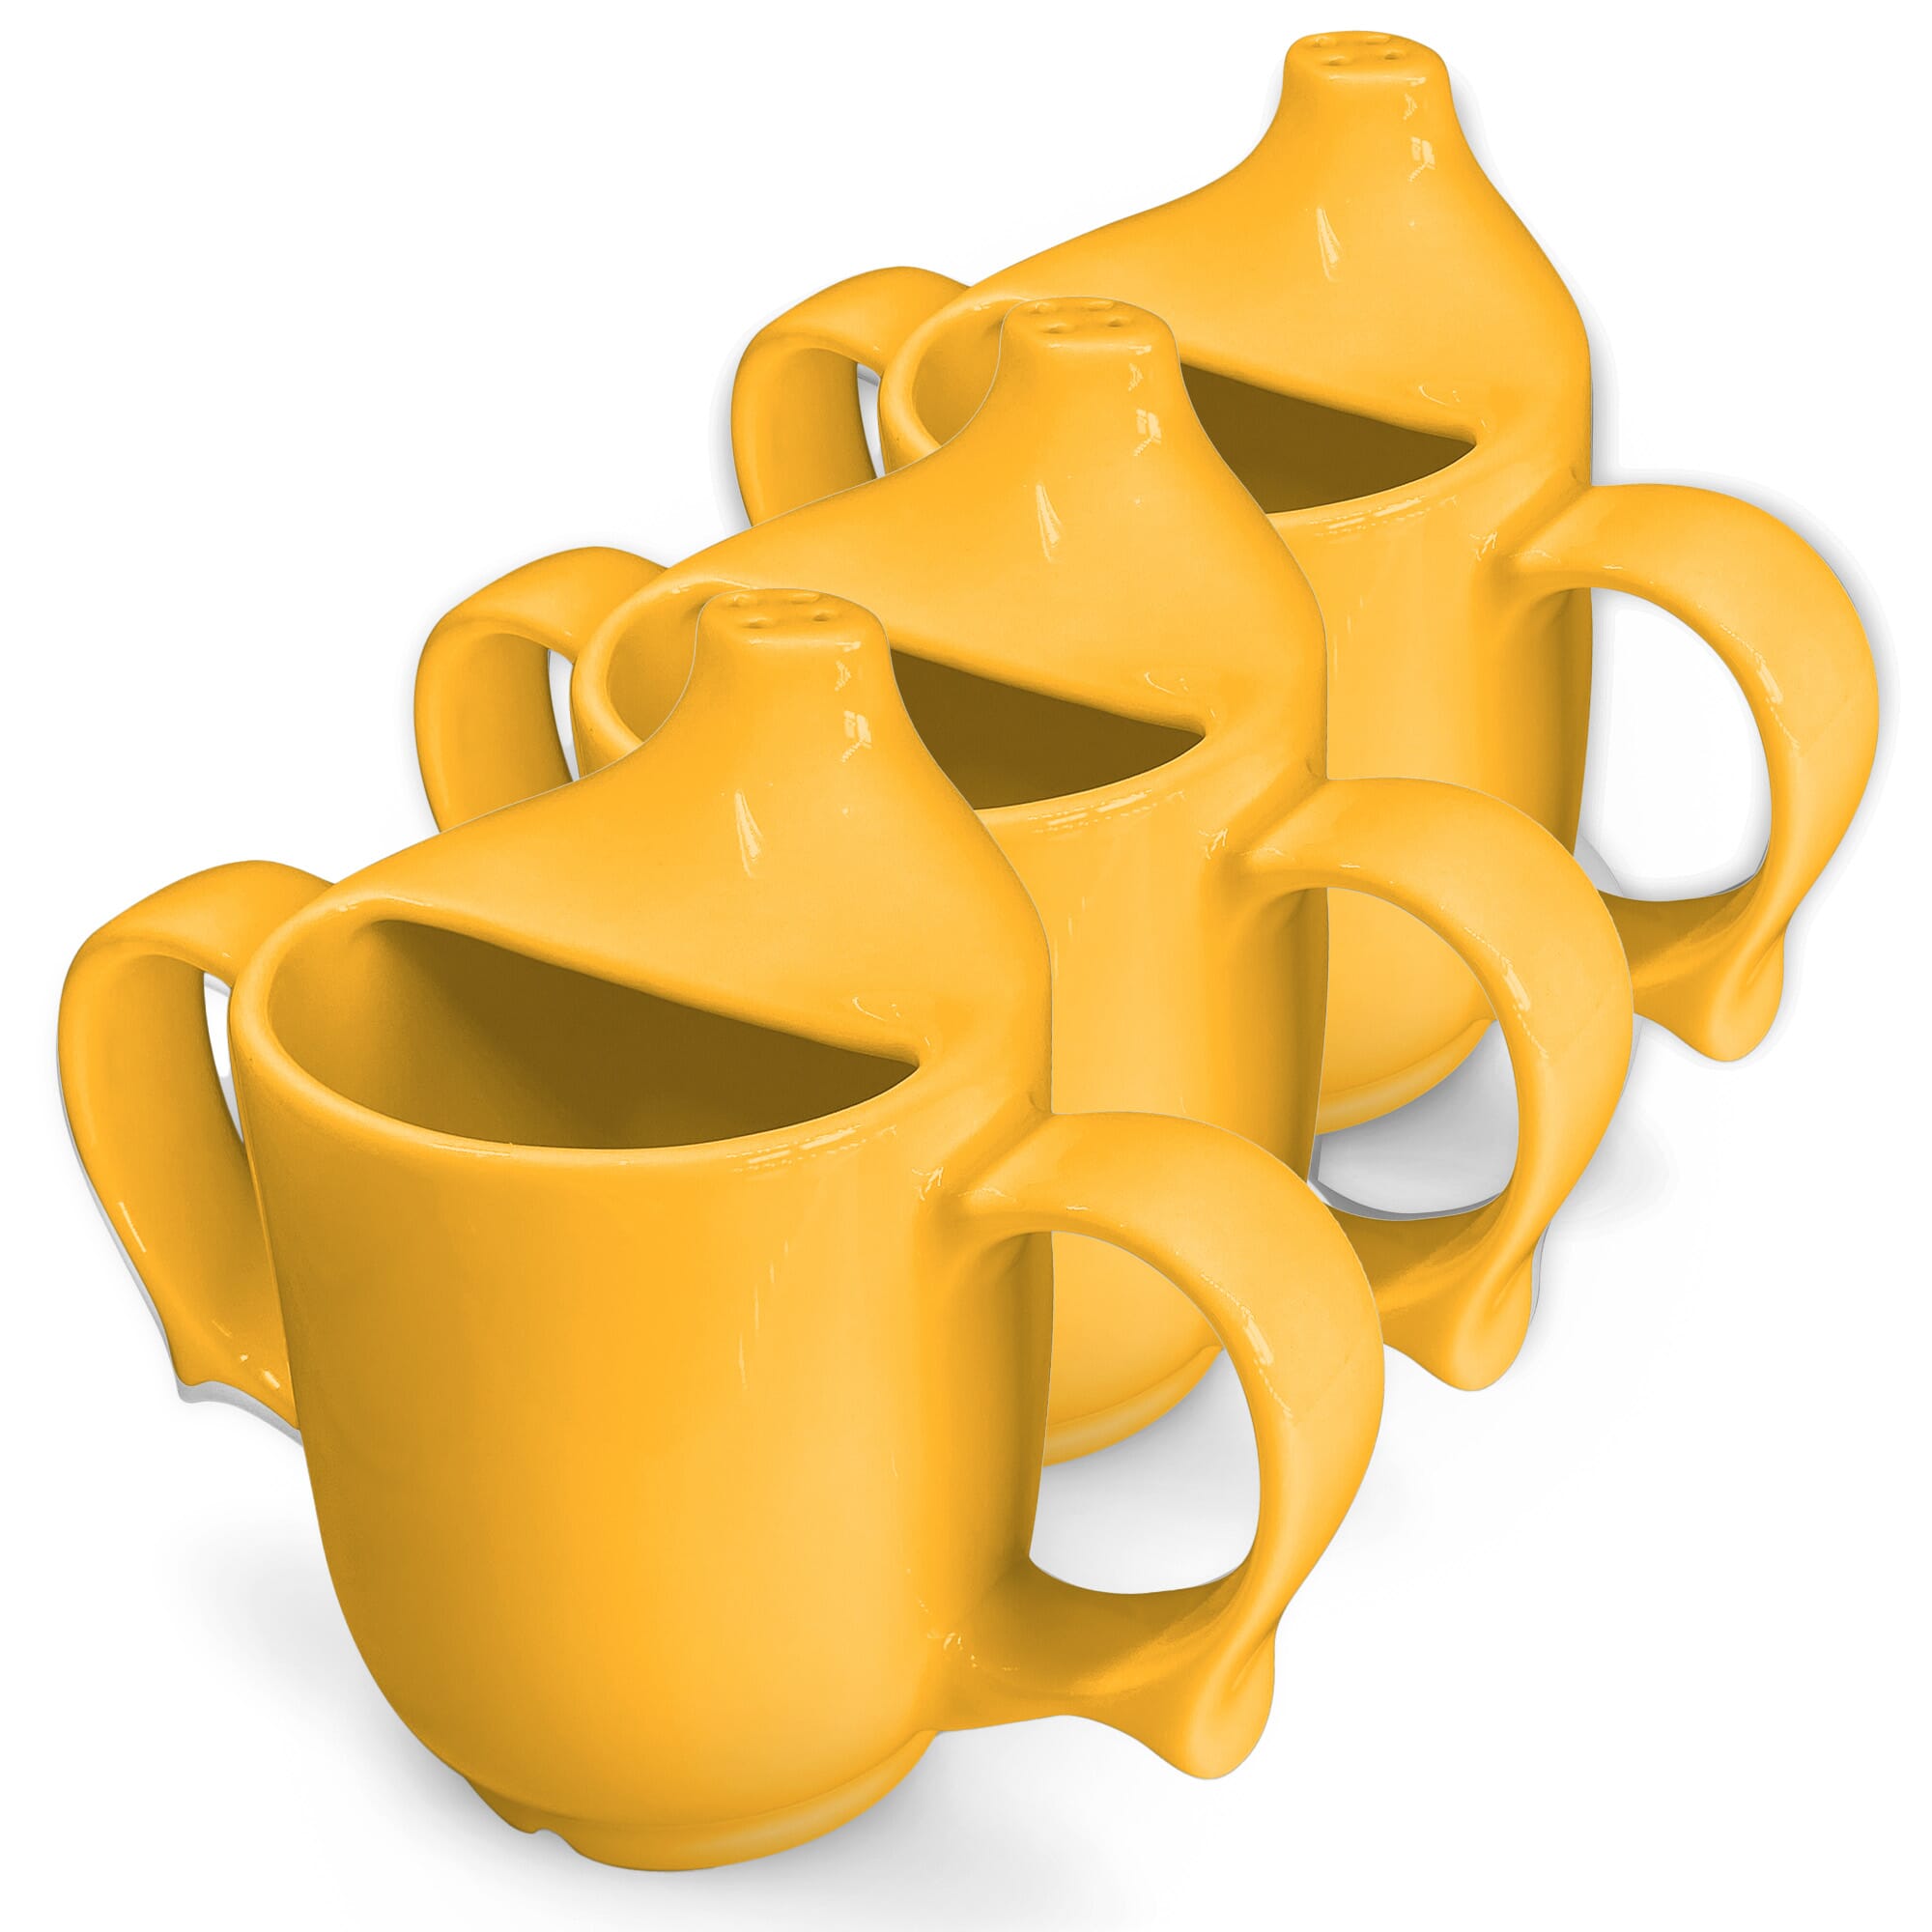 View Dignity Two Handled Drinking Cup Yellow Pack of 3 information